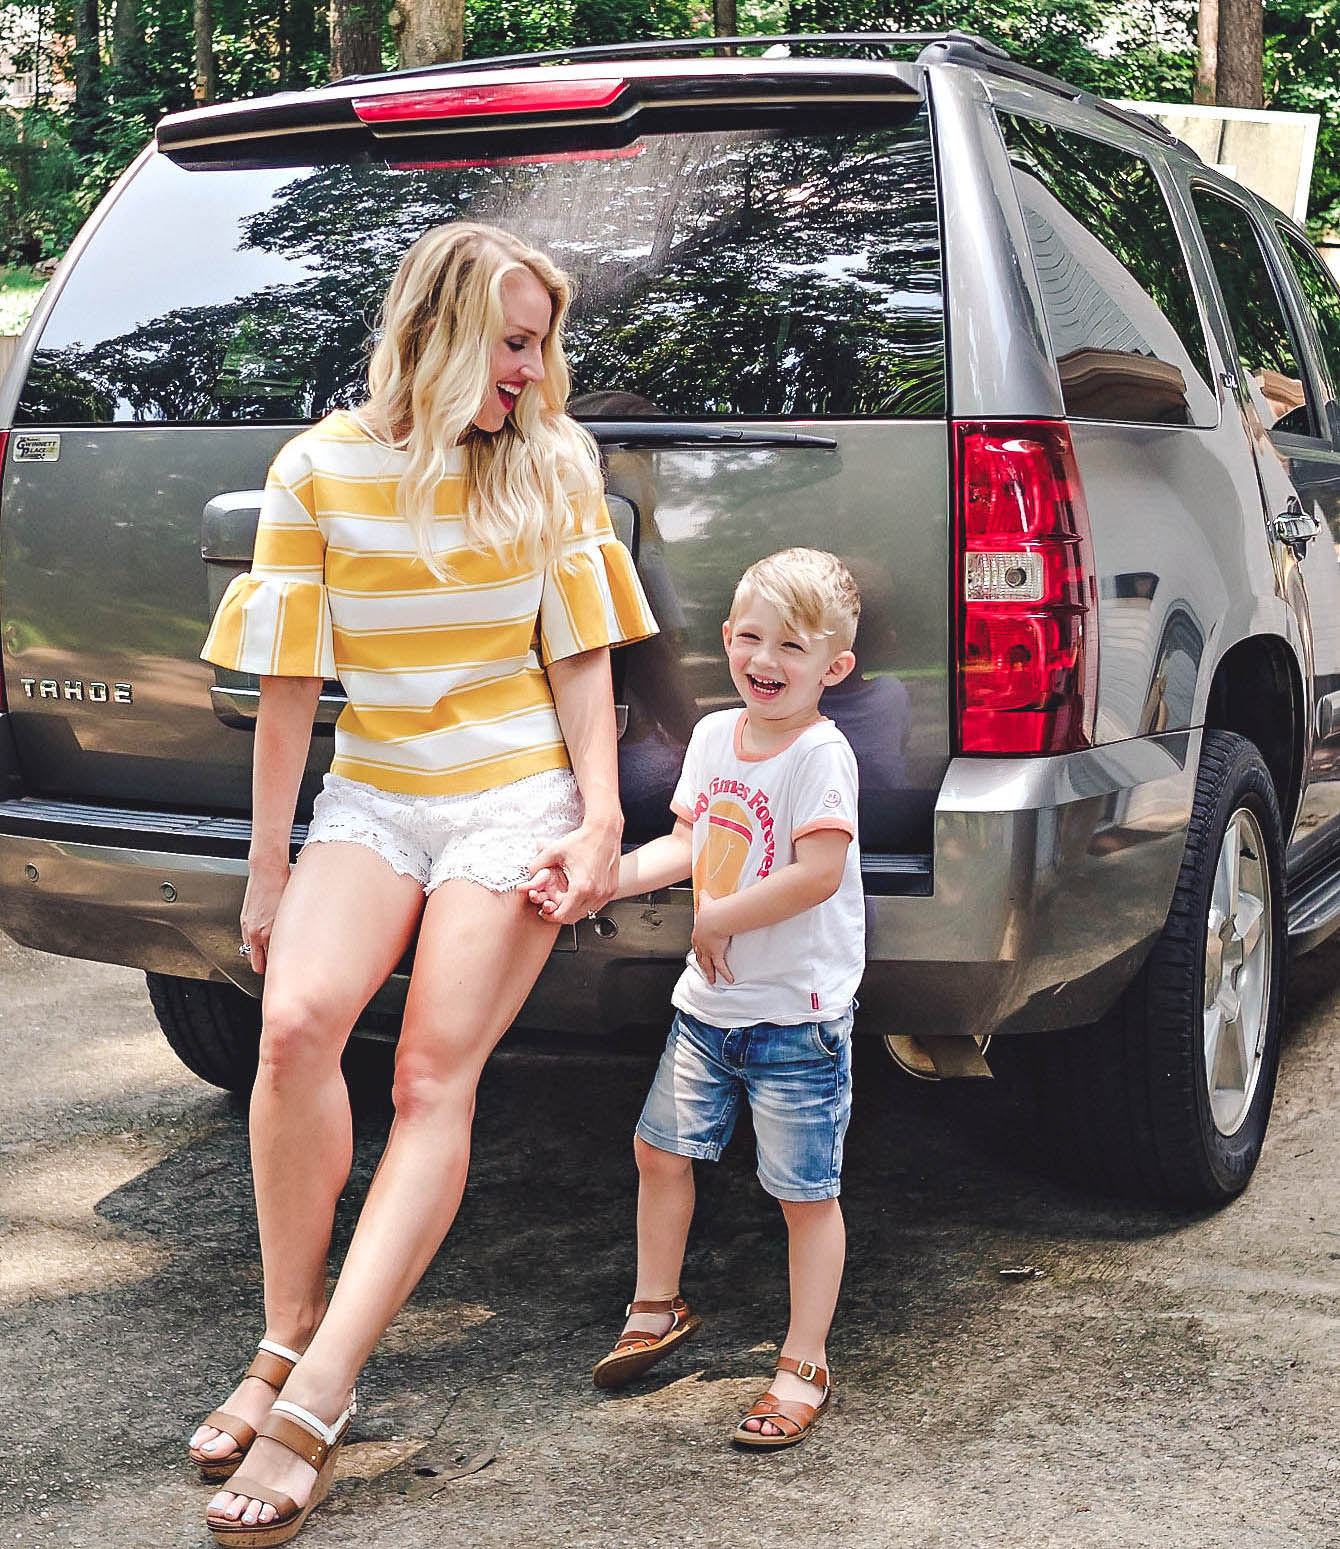 Road Trip Checklist for Kids 4 and Under by popular Atlanta blogger Happily Hughes